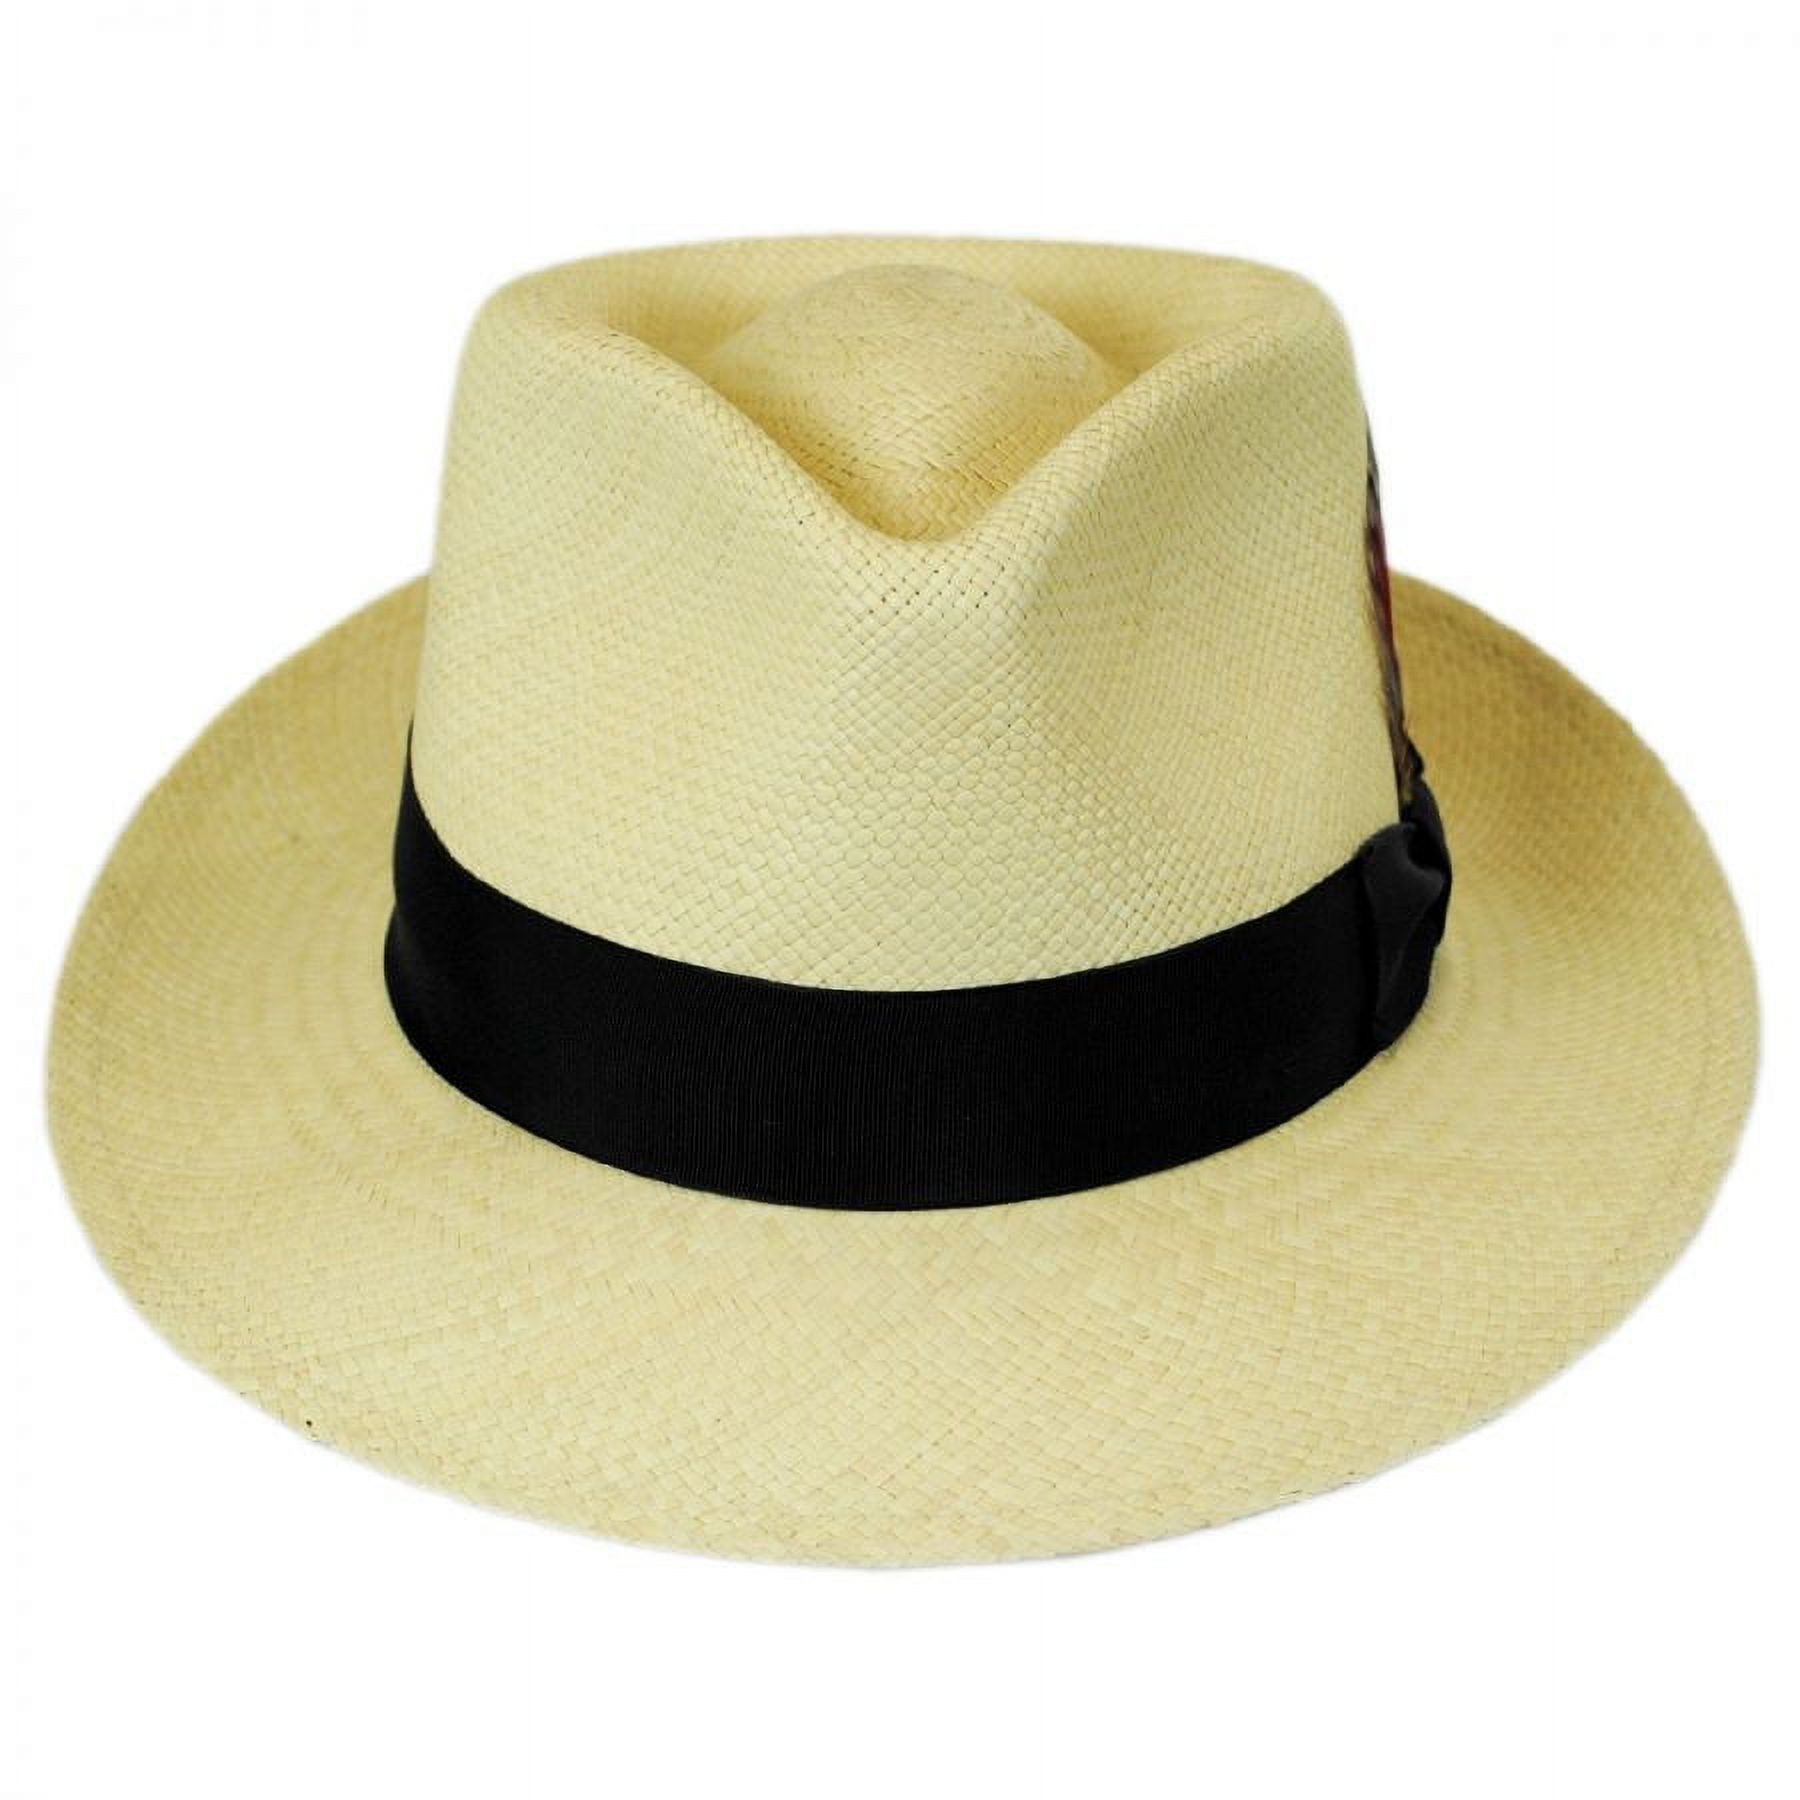 Stain Repellent Panama Straw C-Crown Fedora Hat - XXL - Natural - image 2 of 4